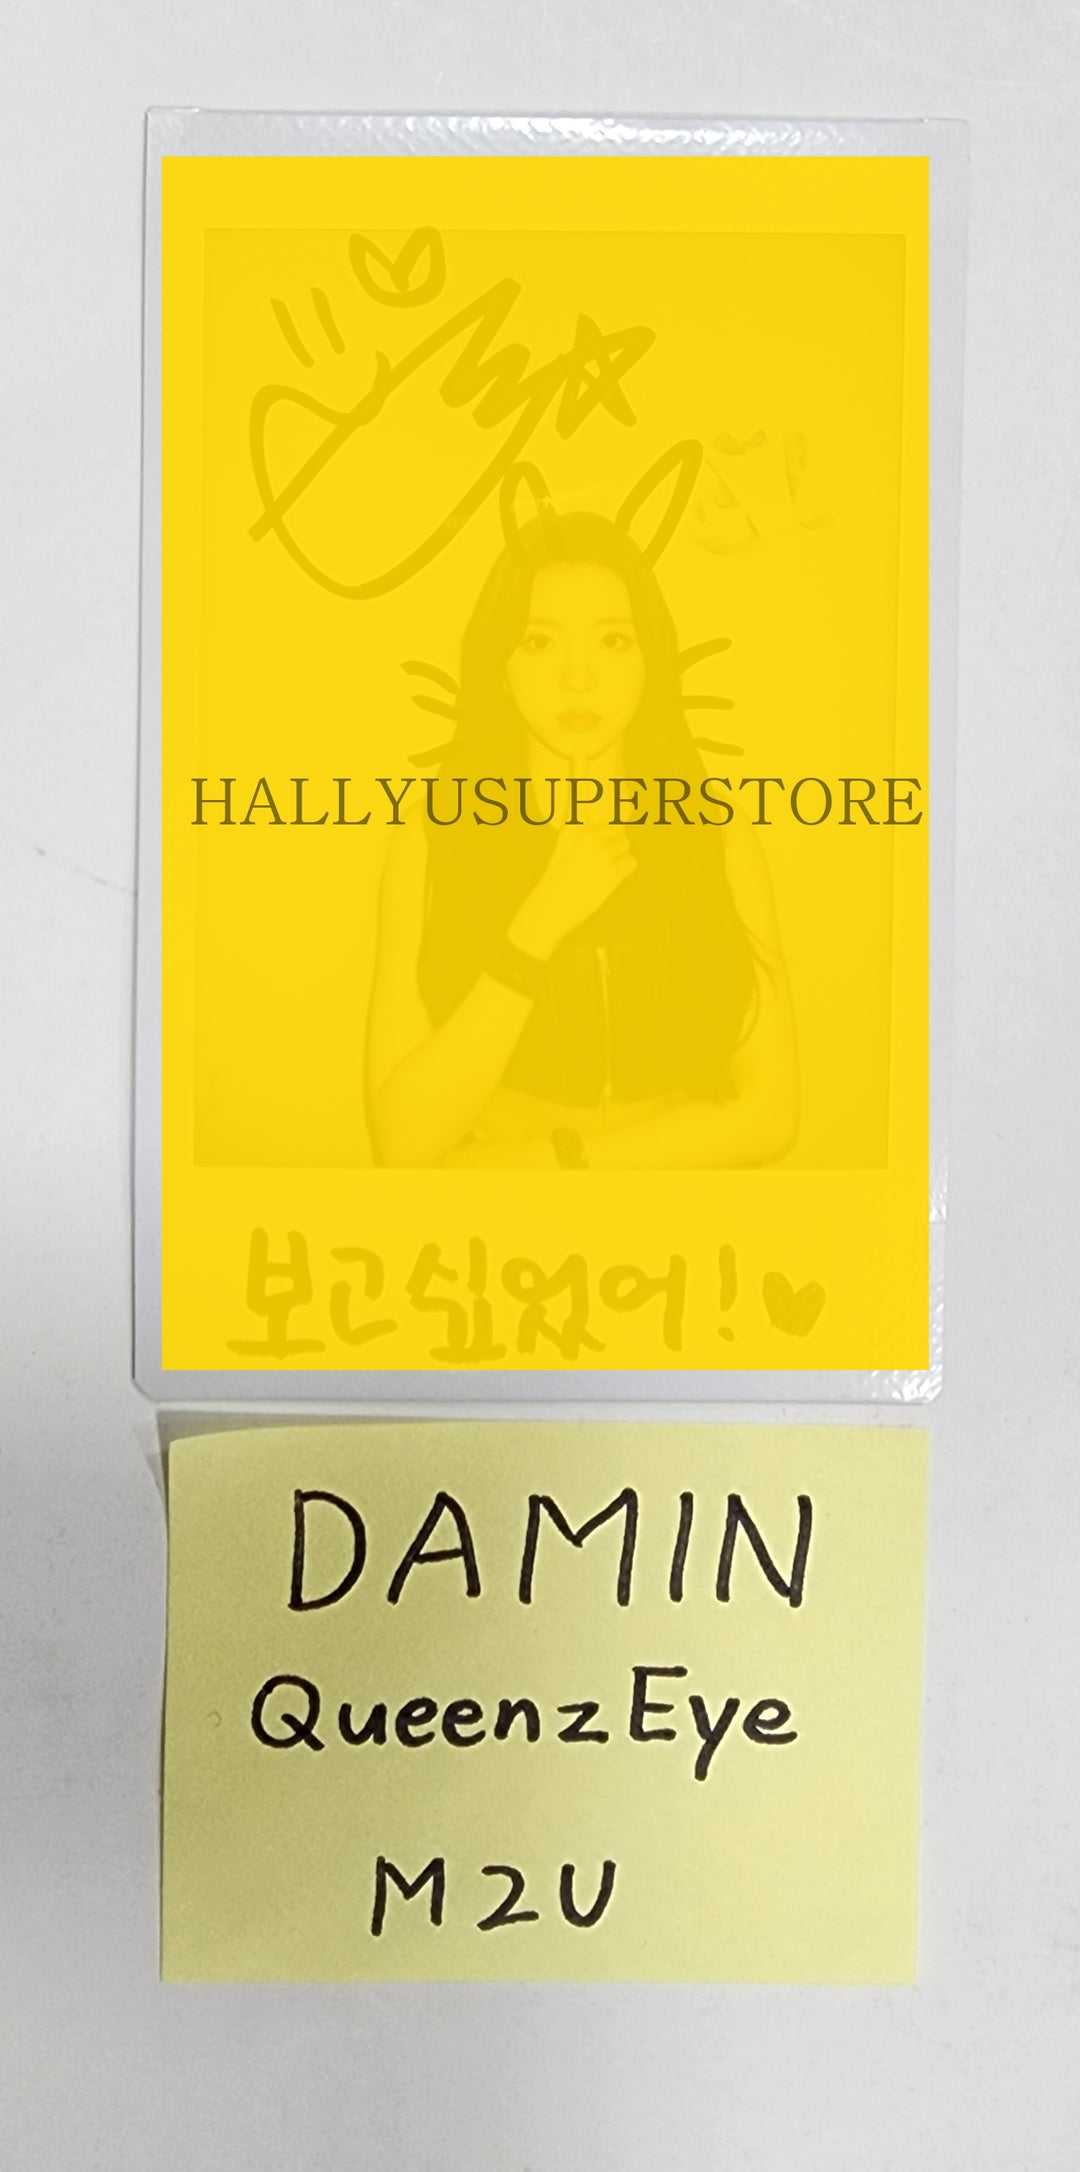 Damin (Of Queenz Eye) "UNI-Q" - Hand Autographed(Signed) Polaroid